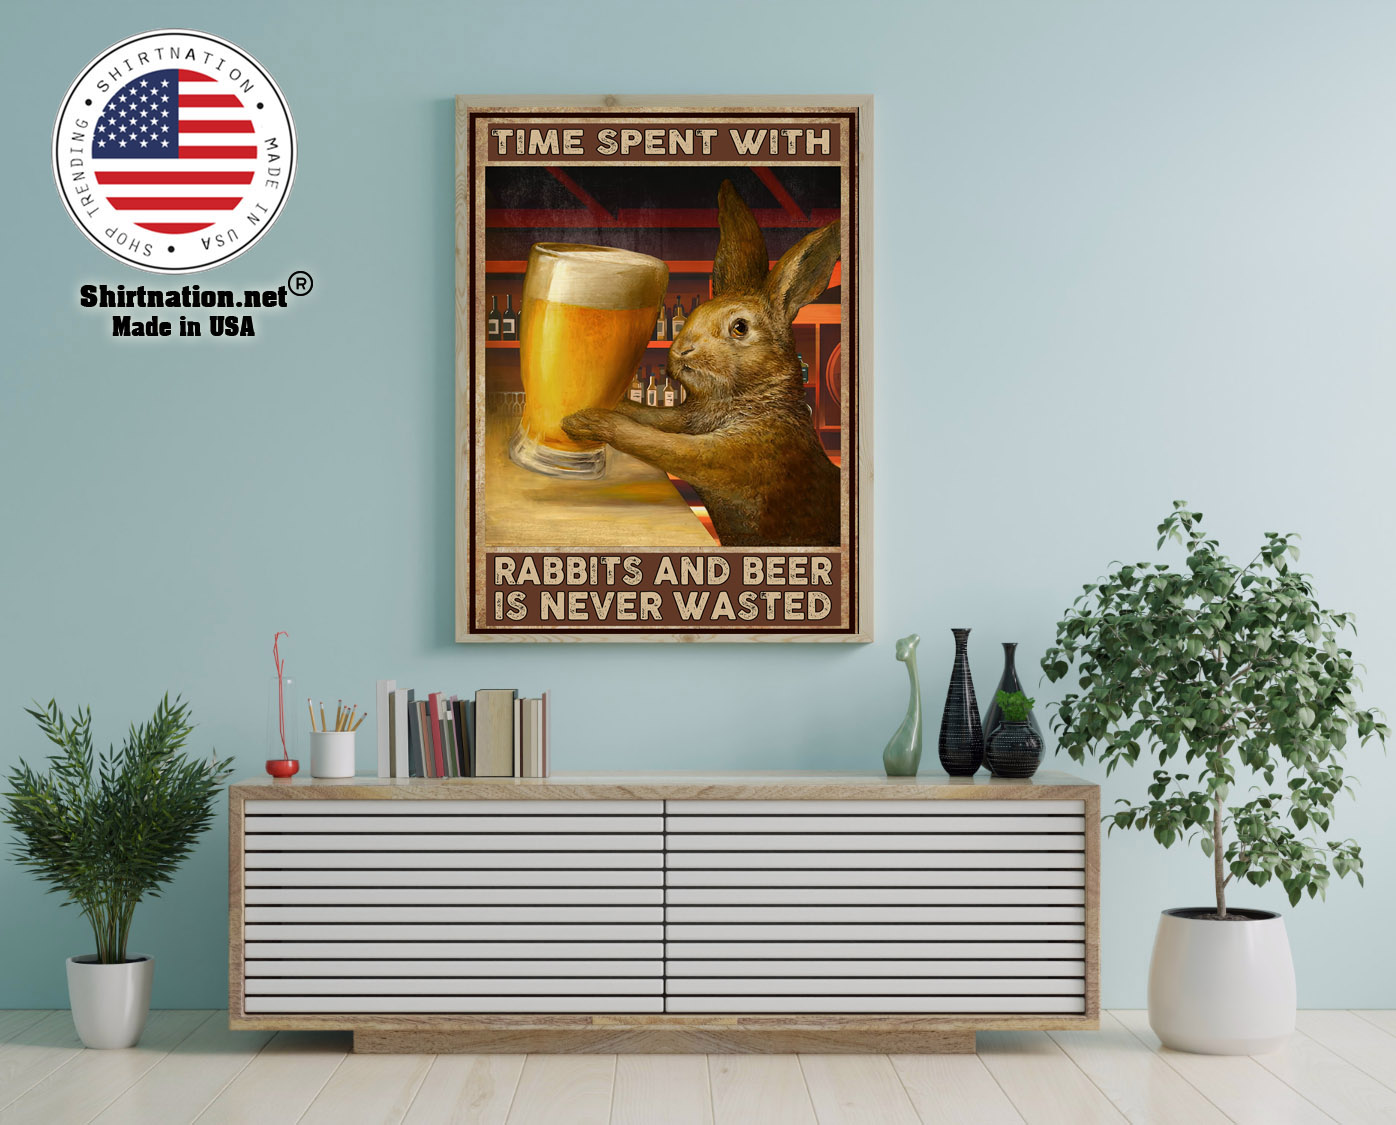 Time spent with rabbits and beer is never wasted poster 12